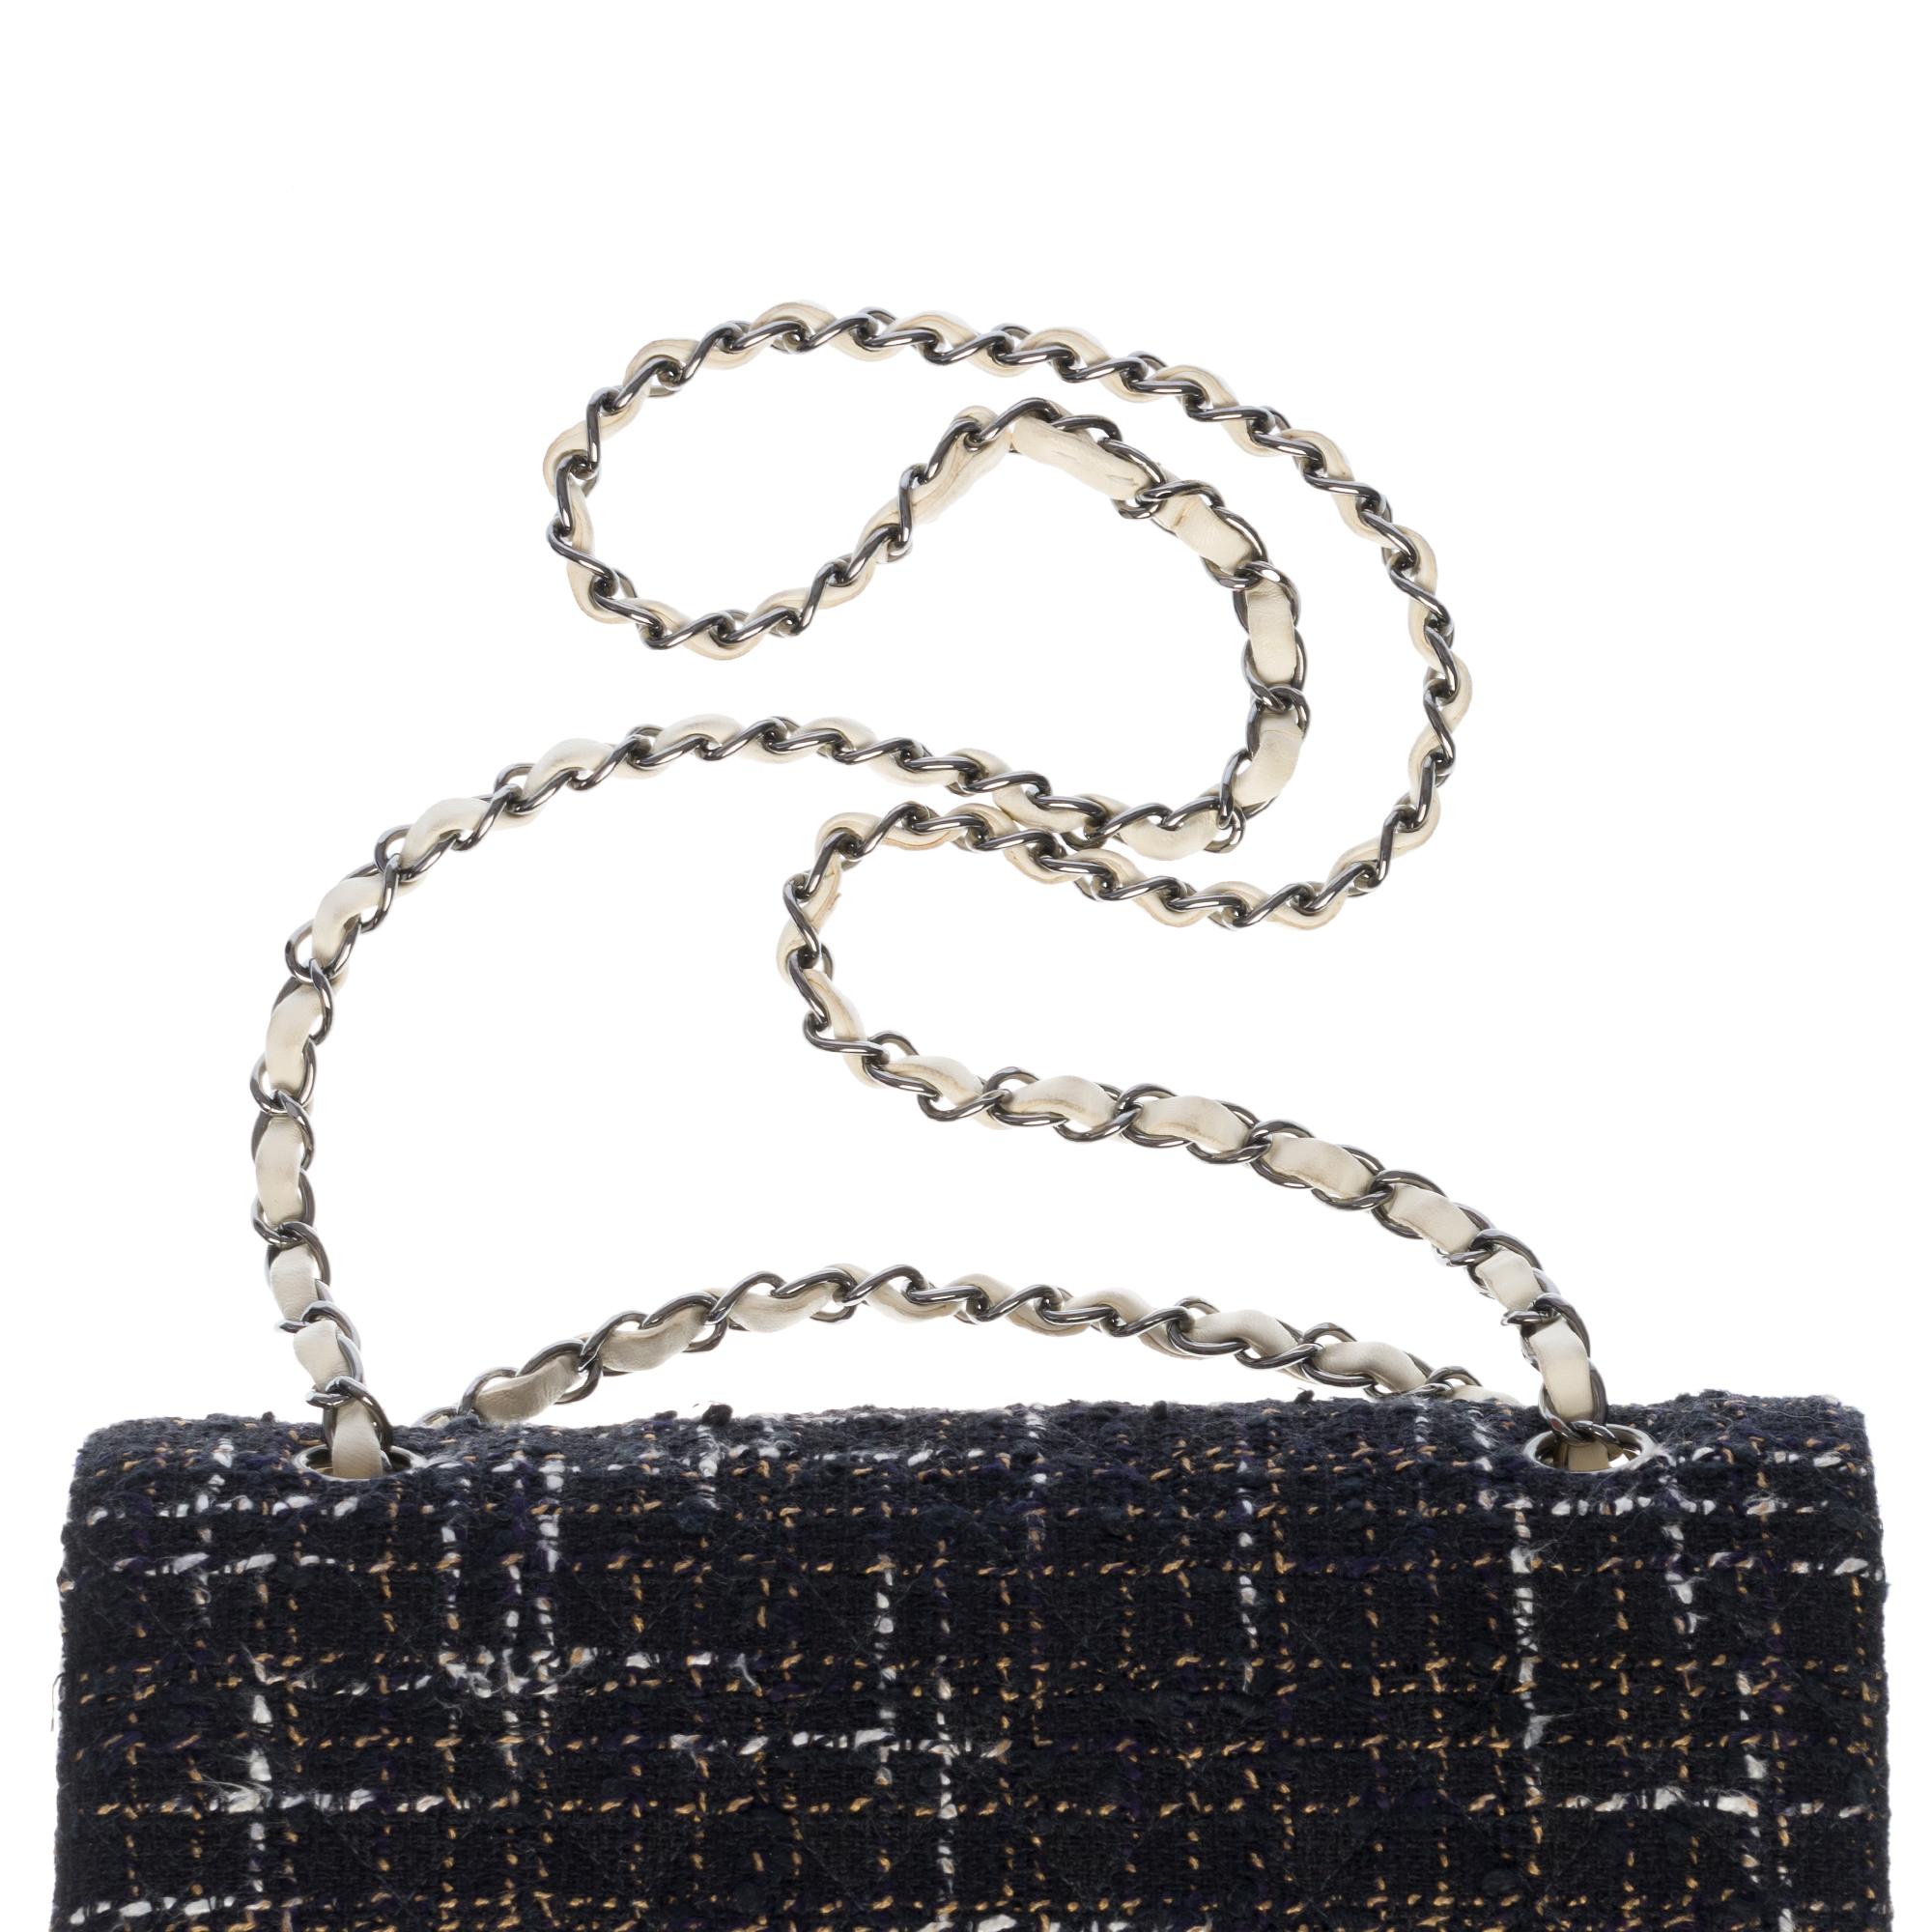 Women's Limited Edition Chanel Timeless Shoulder bag in black & white Tweed with SHW